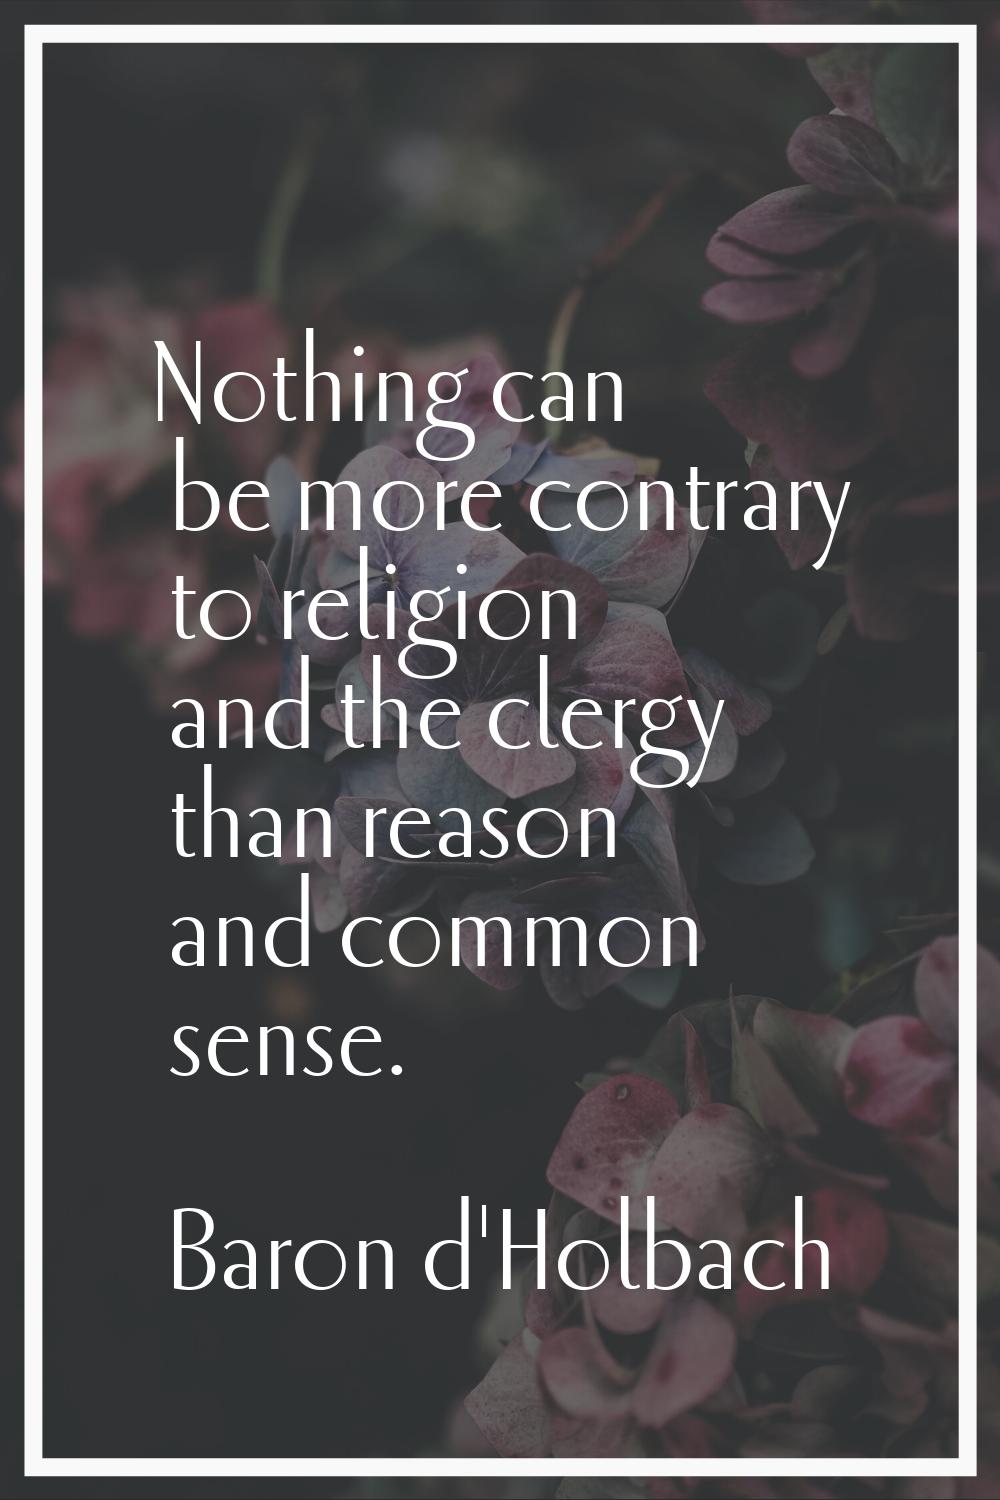 Nothing can be more contrary to religion and the clergy than reason and common sense.